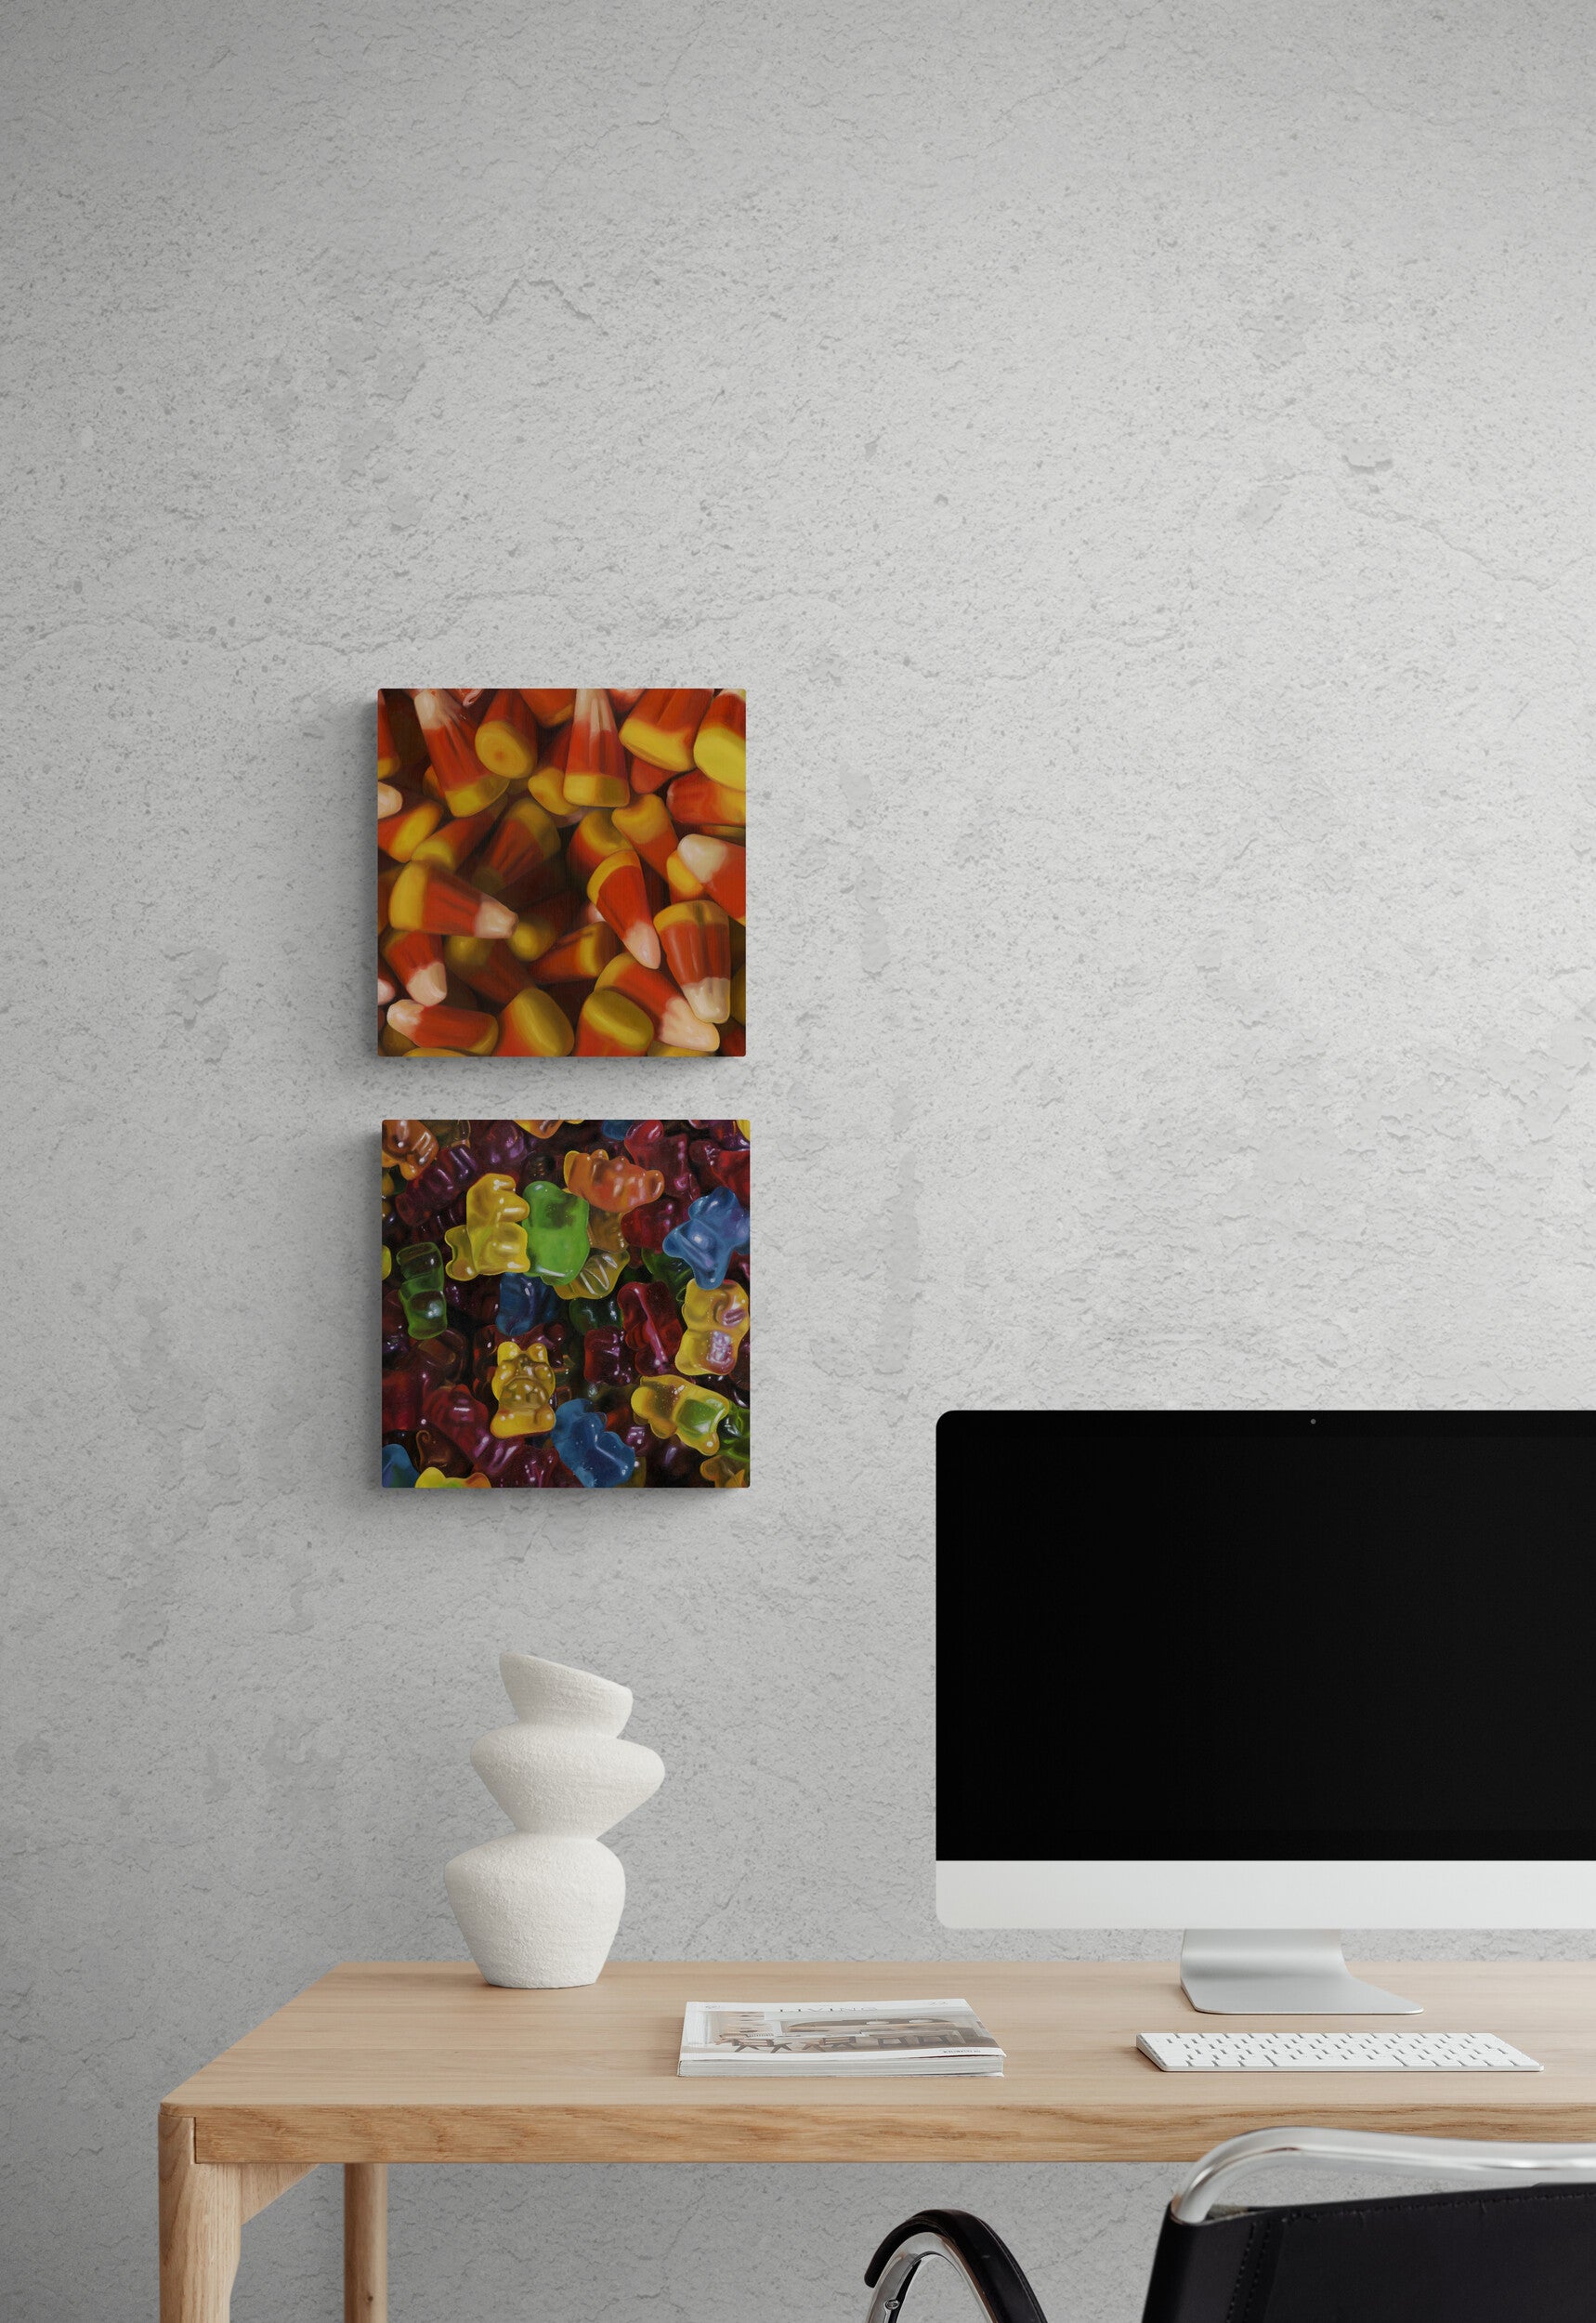 The original paintings “Candy Corn” and “Gummy Bears” by Hannah Kilby from Hannah Michelle Studios, displayed as fine art prints.